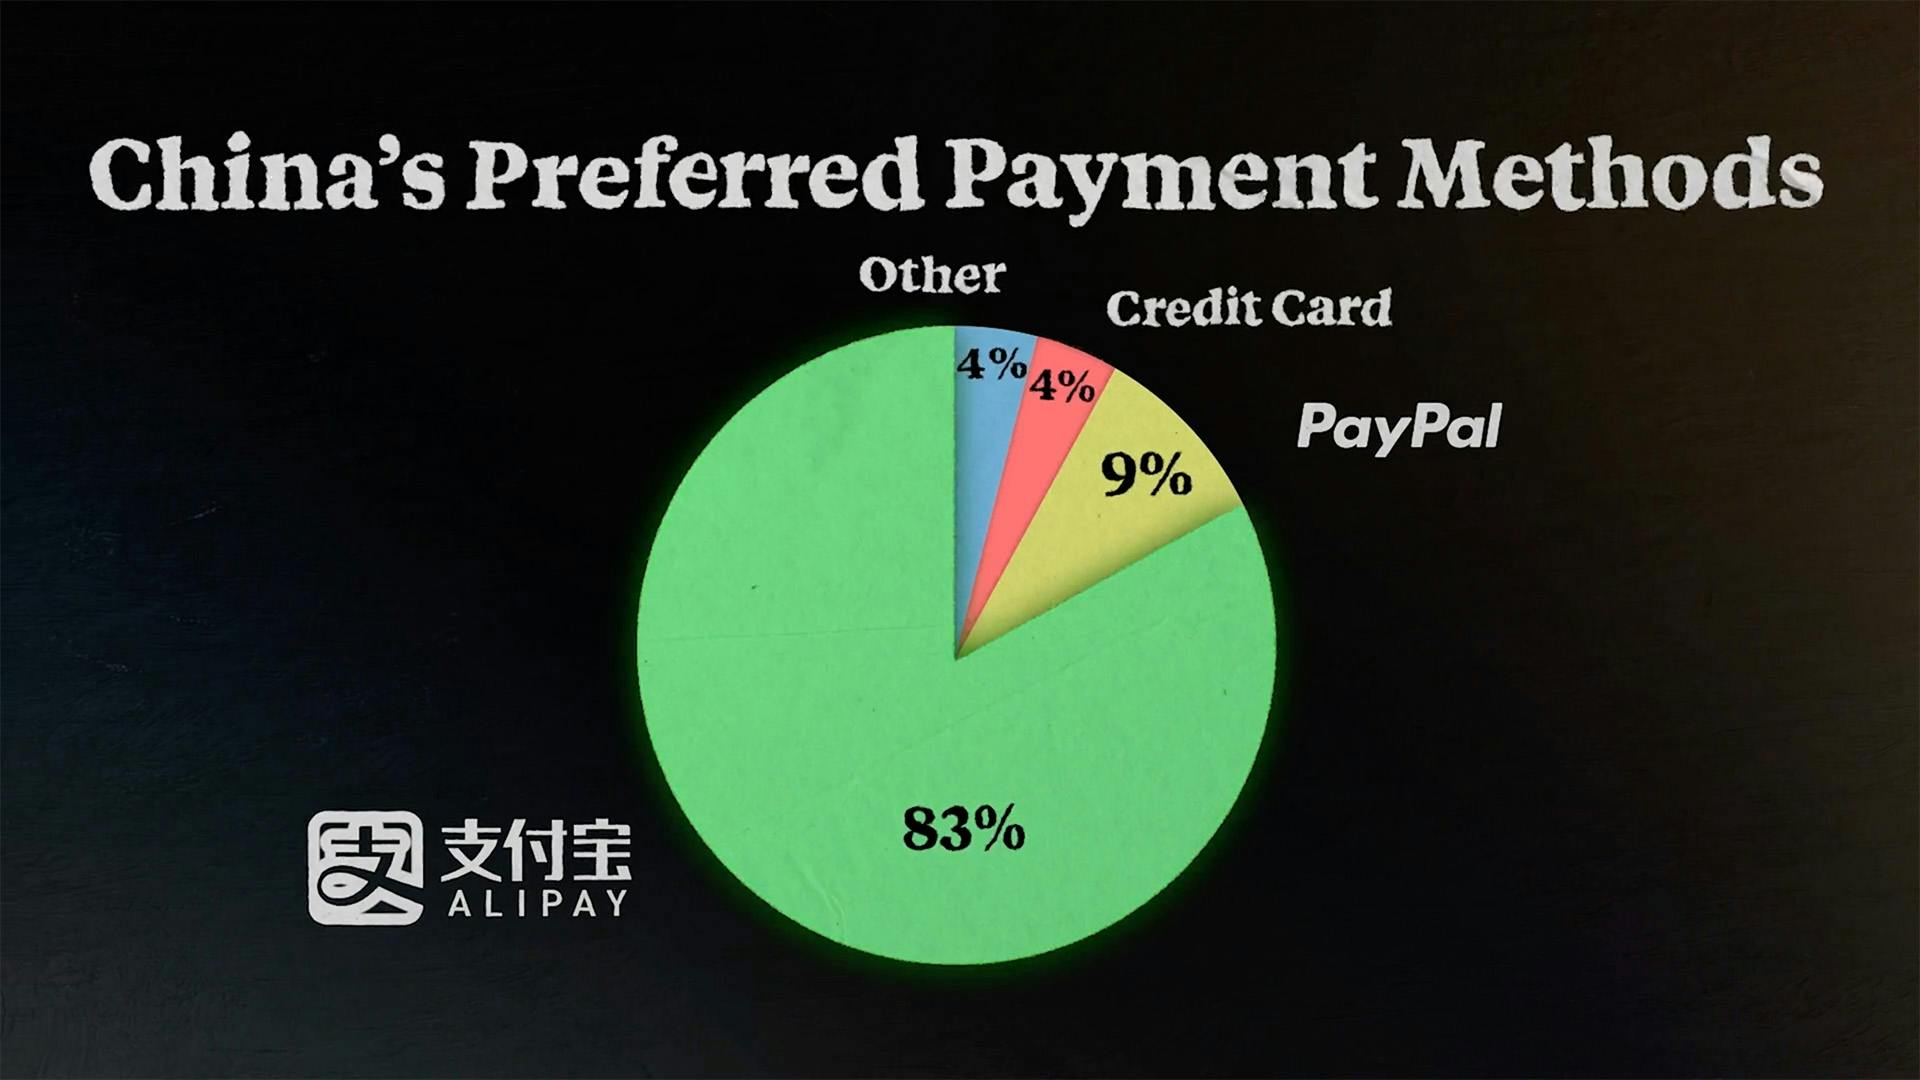 China's preferred payment methods